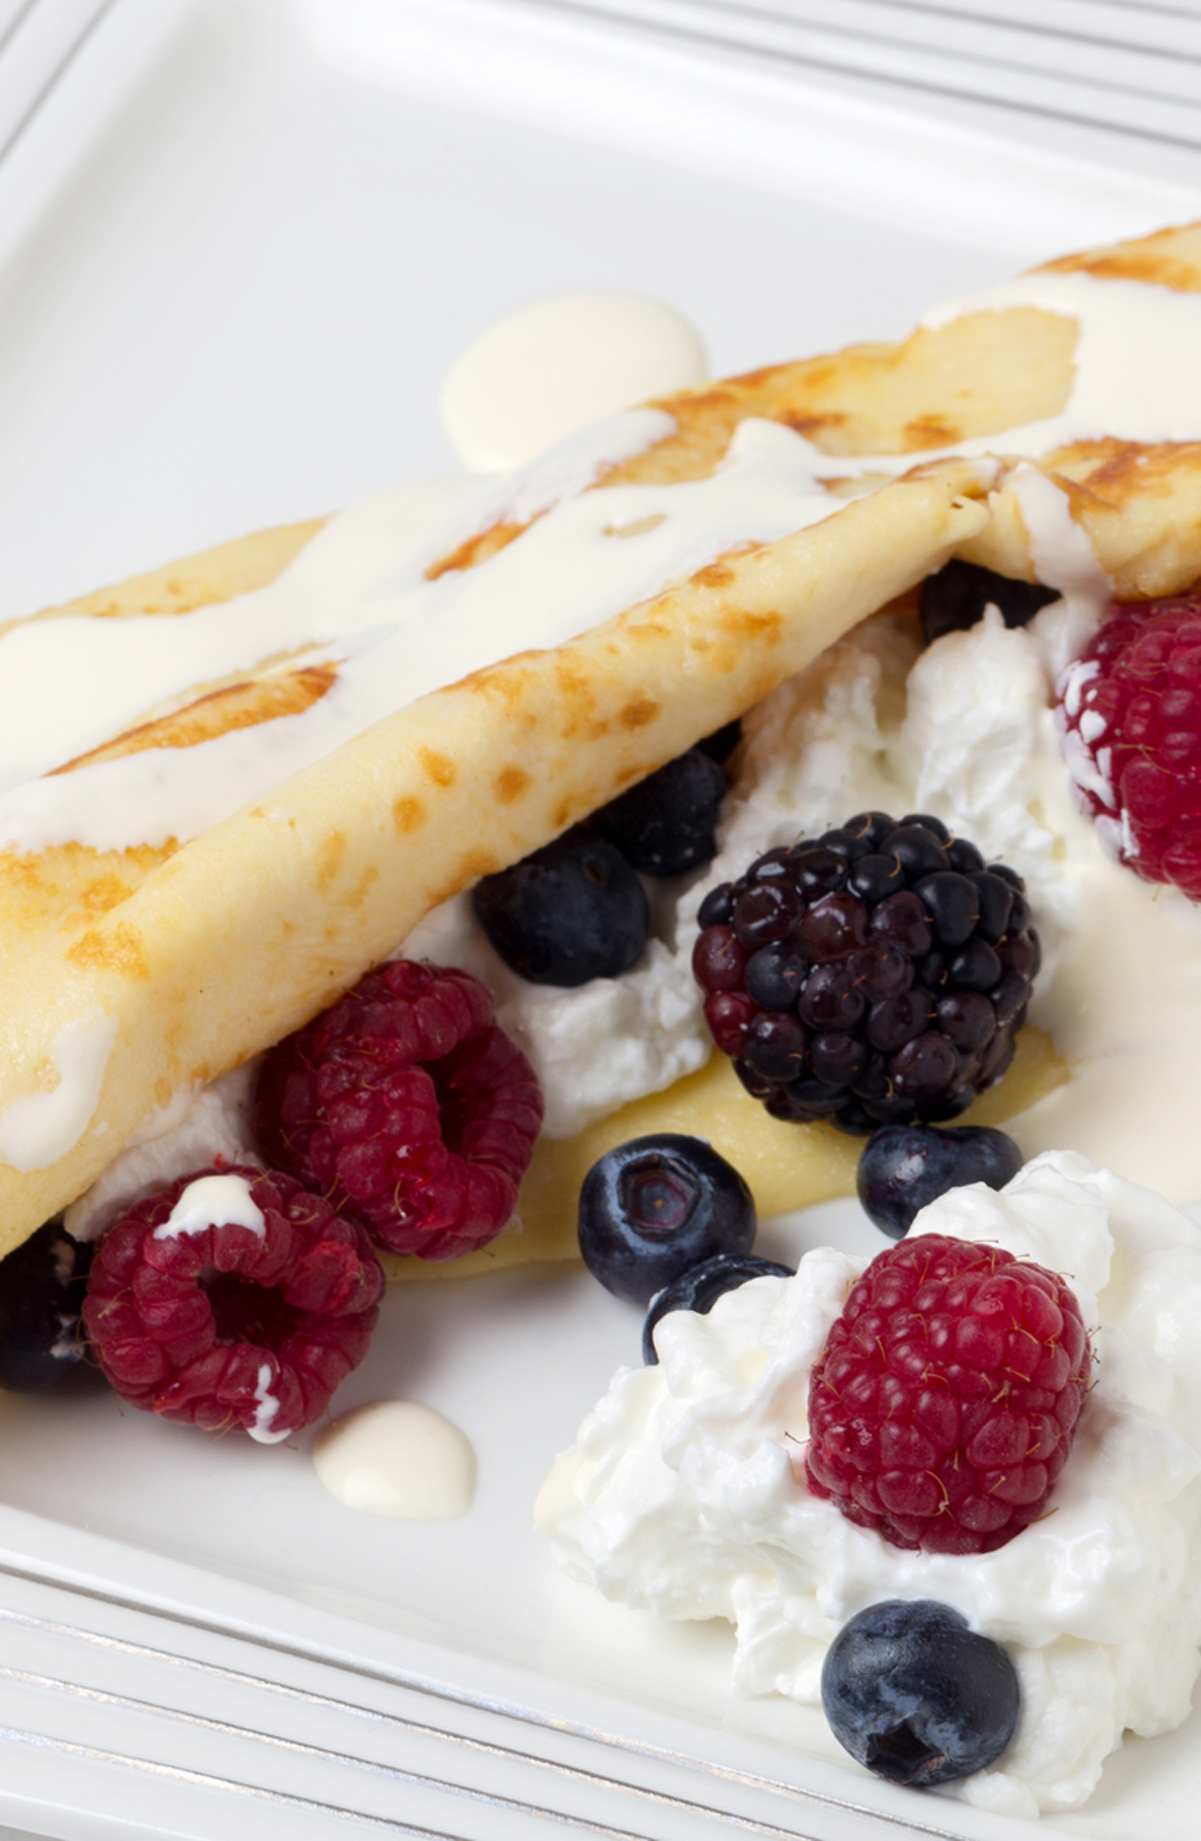 Weight Watchers Mixed Berry Crepe on a white surface.